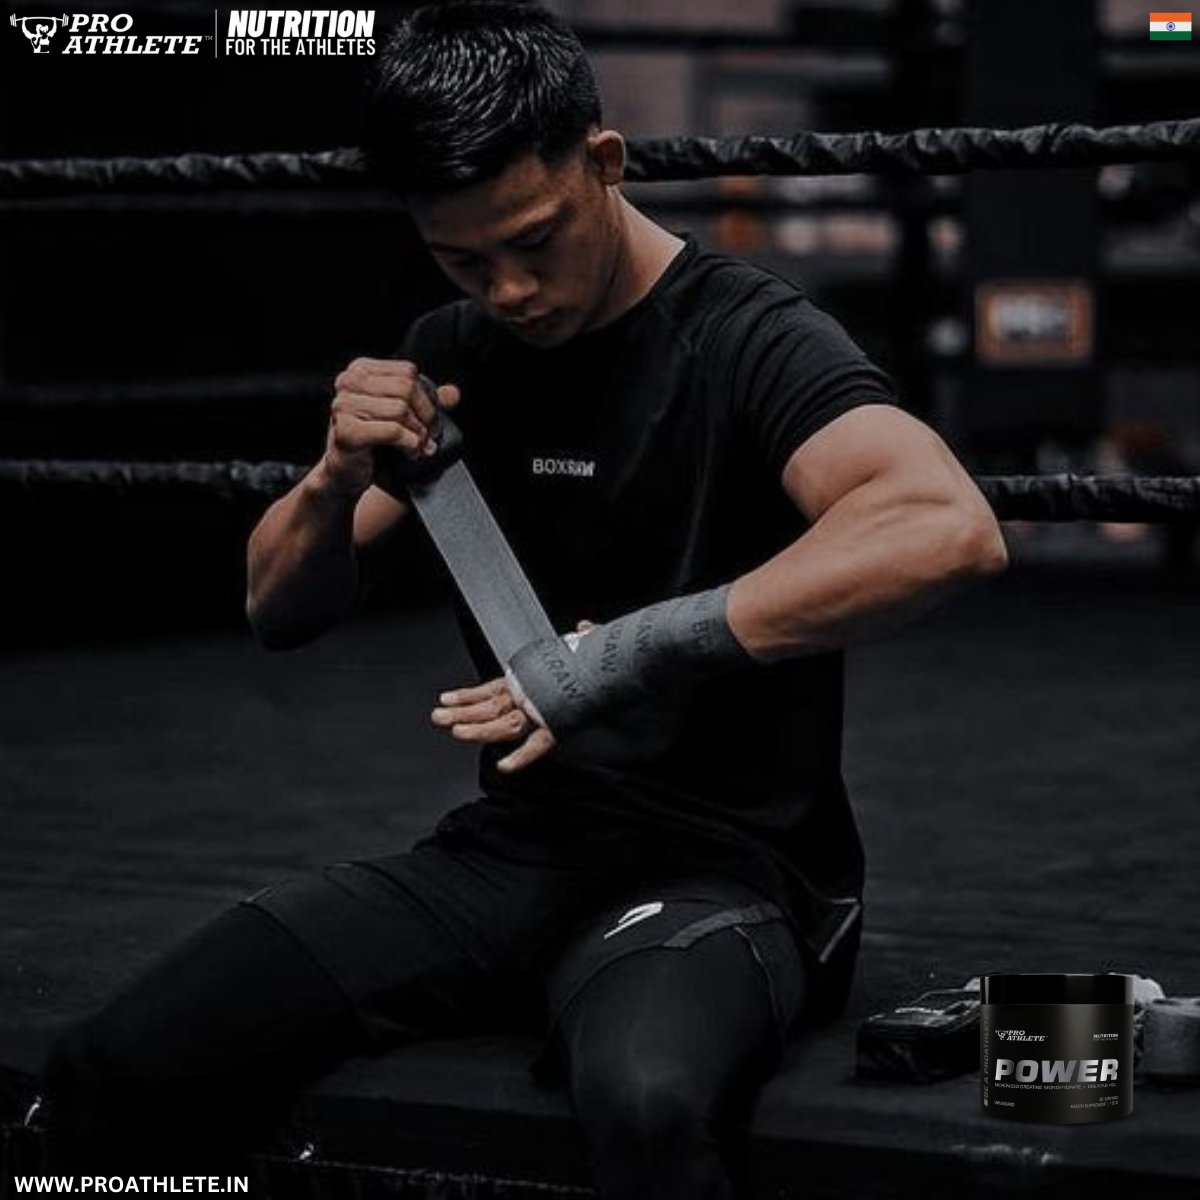 Unleash your Muscles' Power. Try it to believe it. 
. 
. 
#proathlete #power #sportsnutrition #supplements #creatine #hcl #bodybuilding #weightlifting #crossfit #atp #energy #preworkout #intraworkout #powerlifting #fatloss #leanmuscles #monohydrate #postworkout #amazon #flipkart